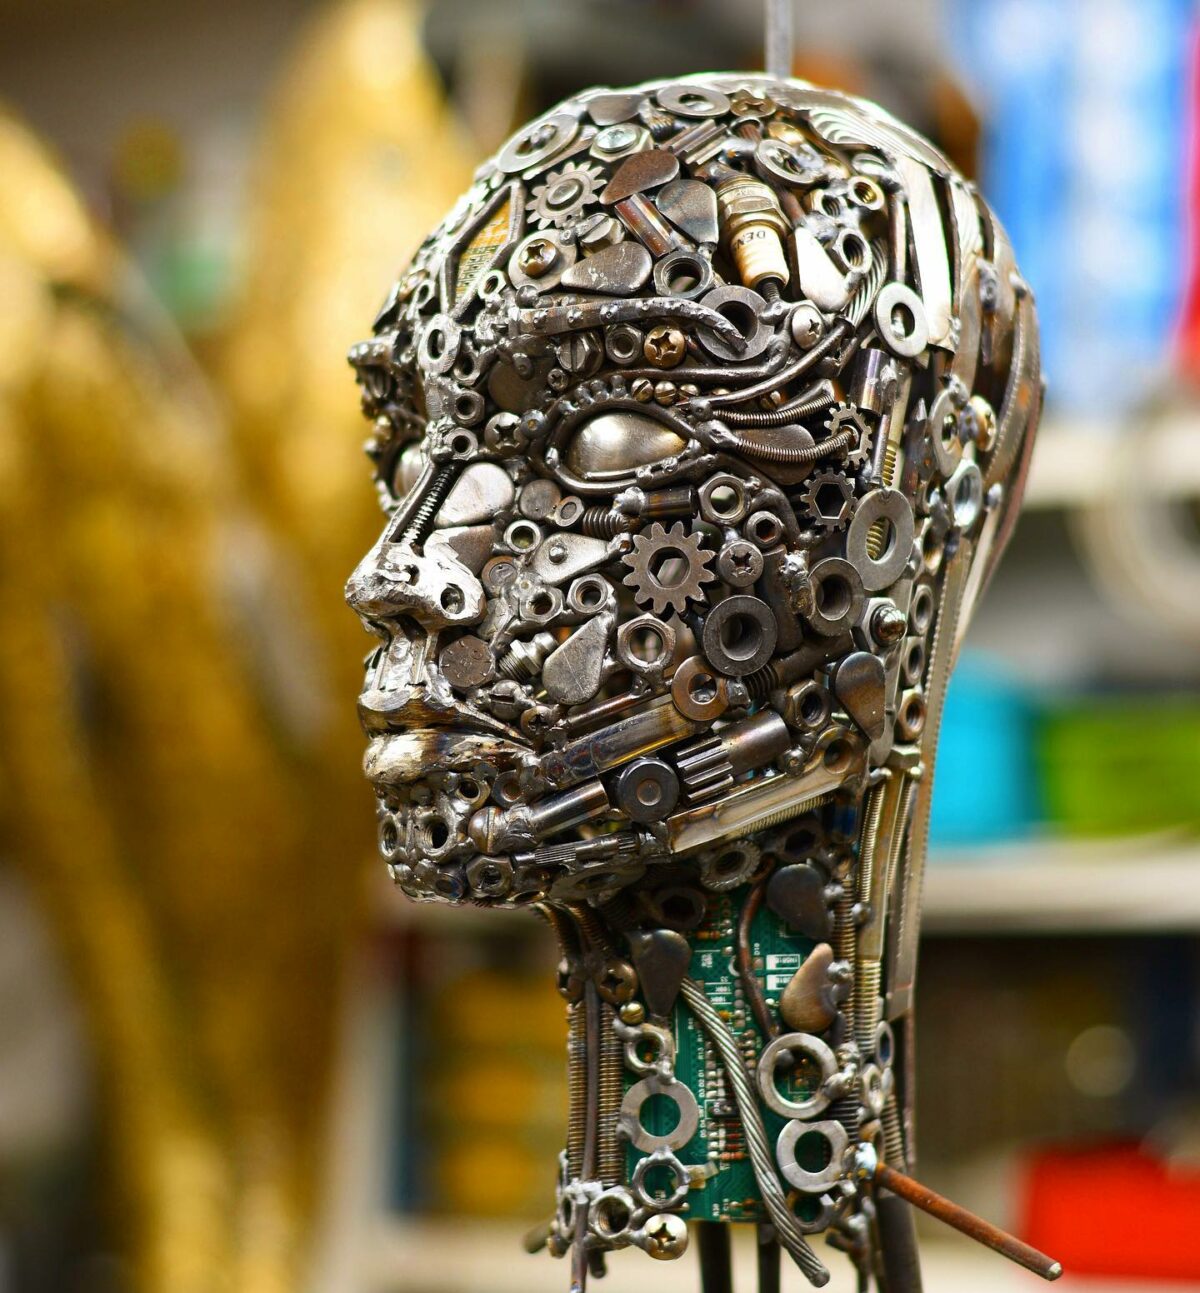 Incredible Welded Sculptures Made From Scrap Metal By Brian Mock 13 1